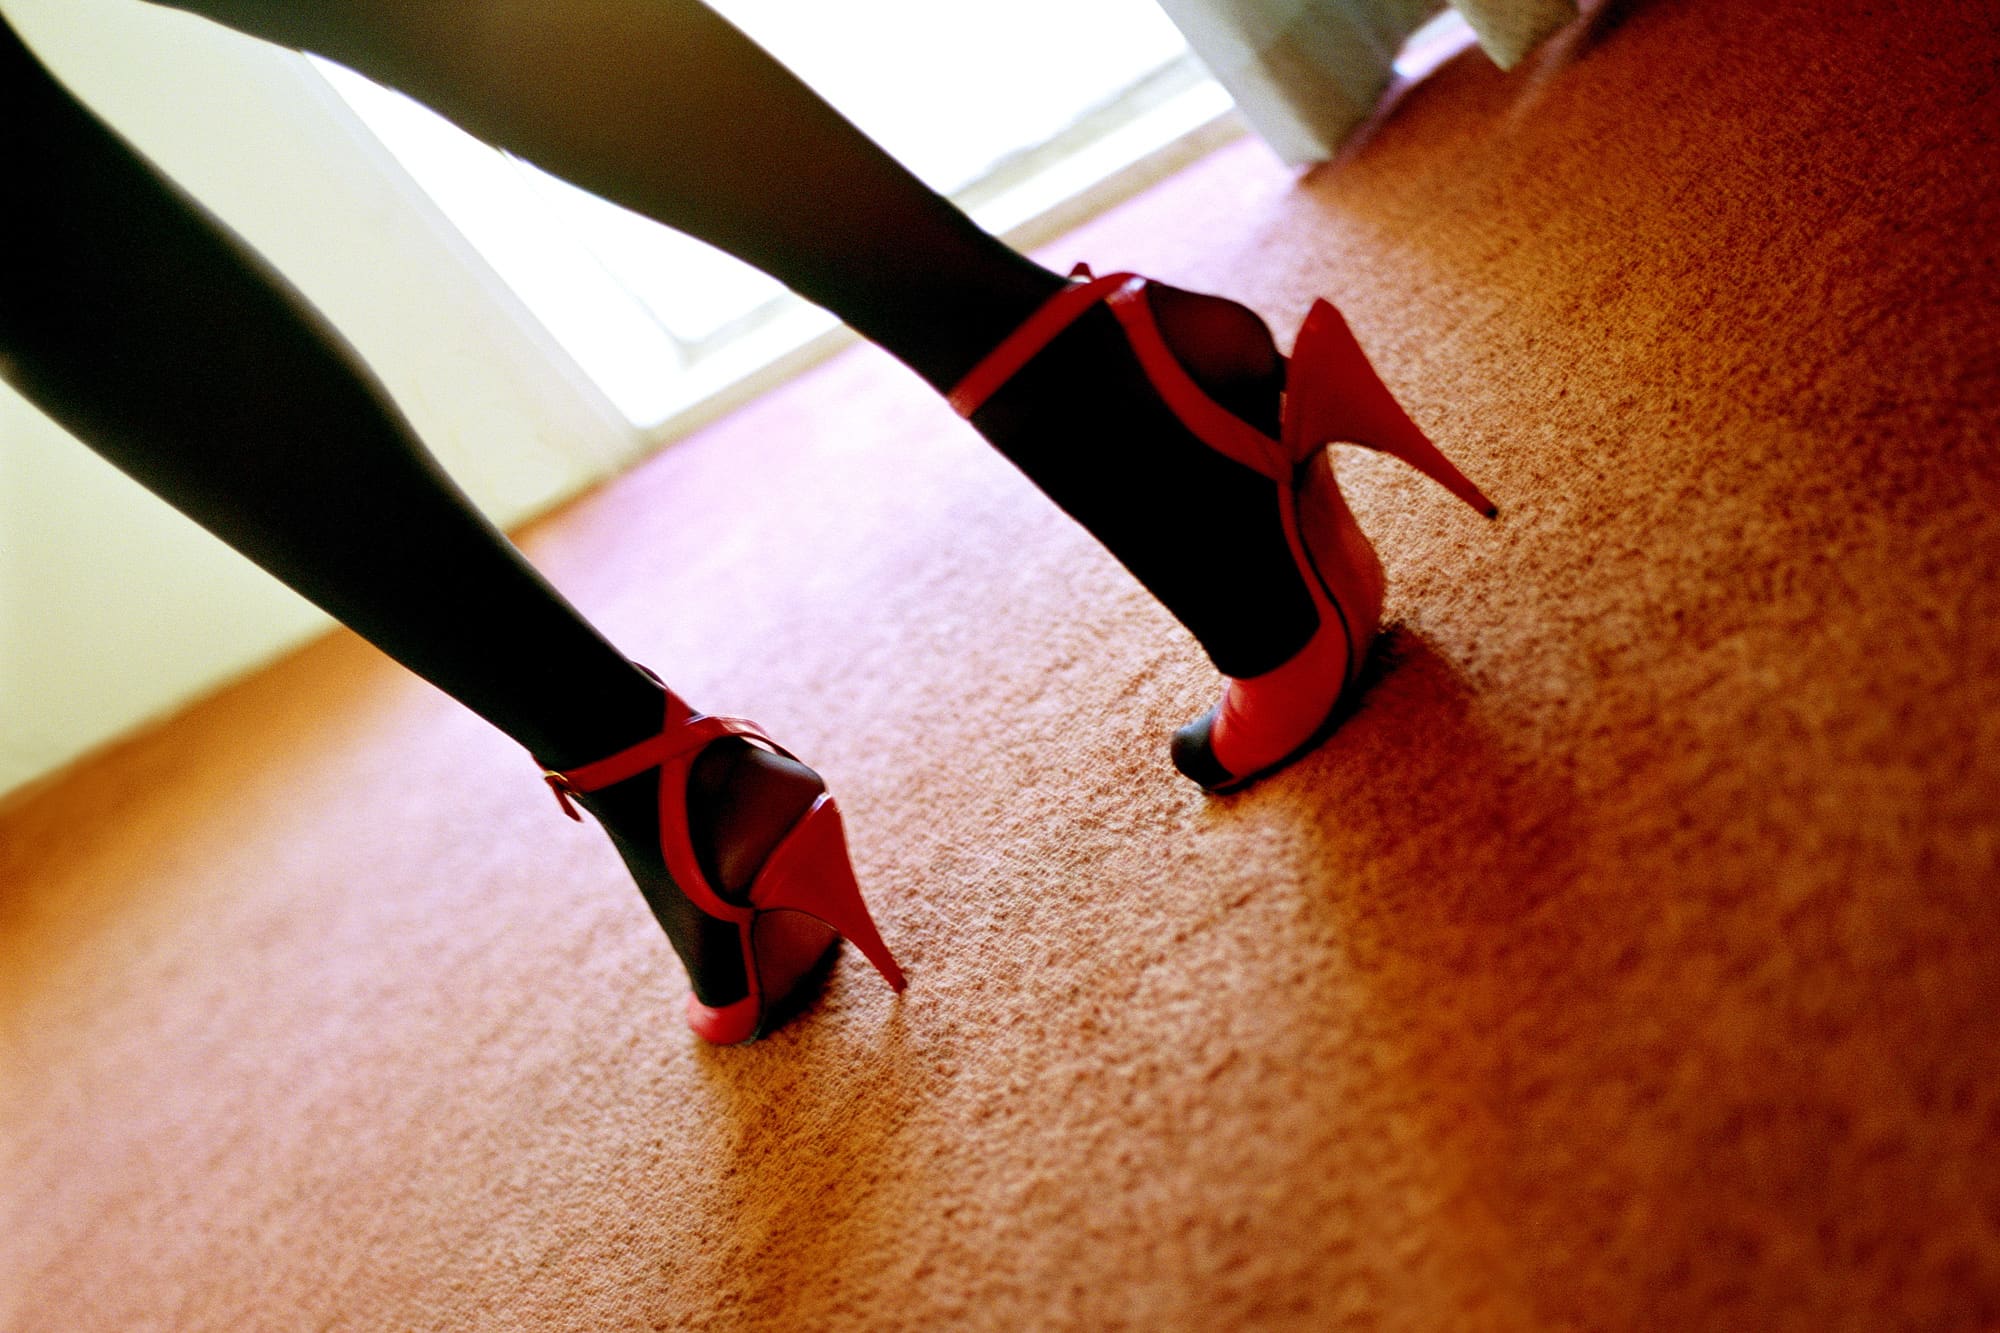 Why Are High Heels A Turn On?